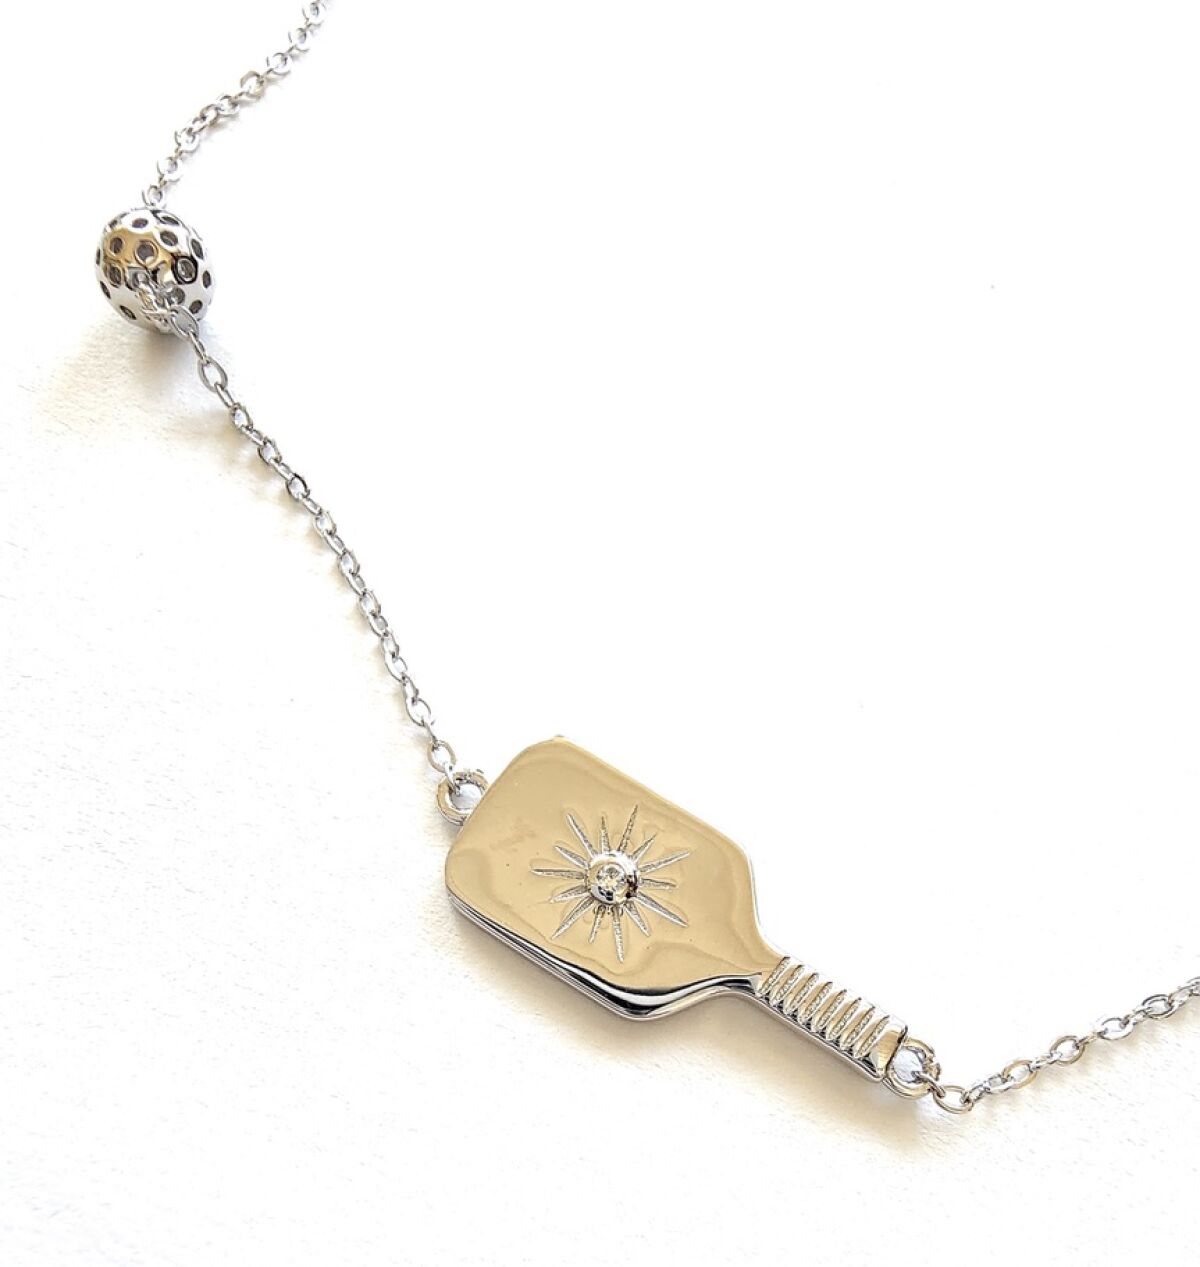 The Dainty Dinker necklace from PickleBelle.